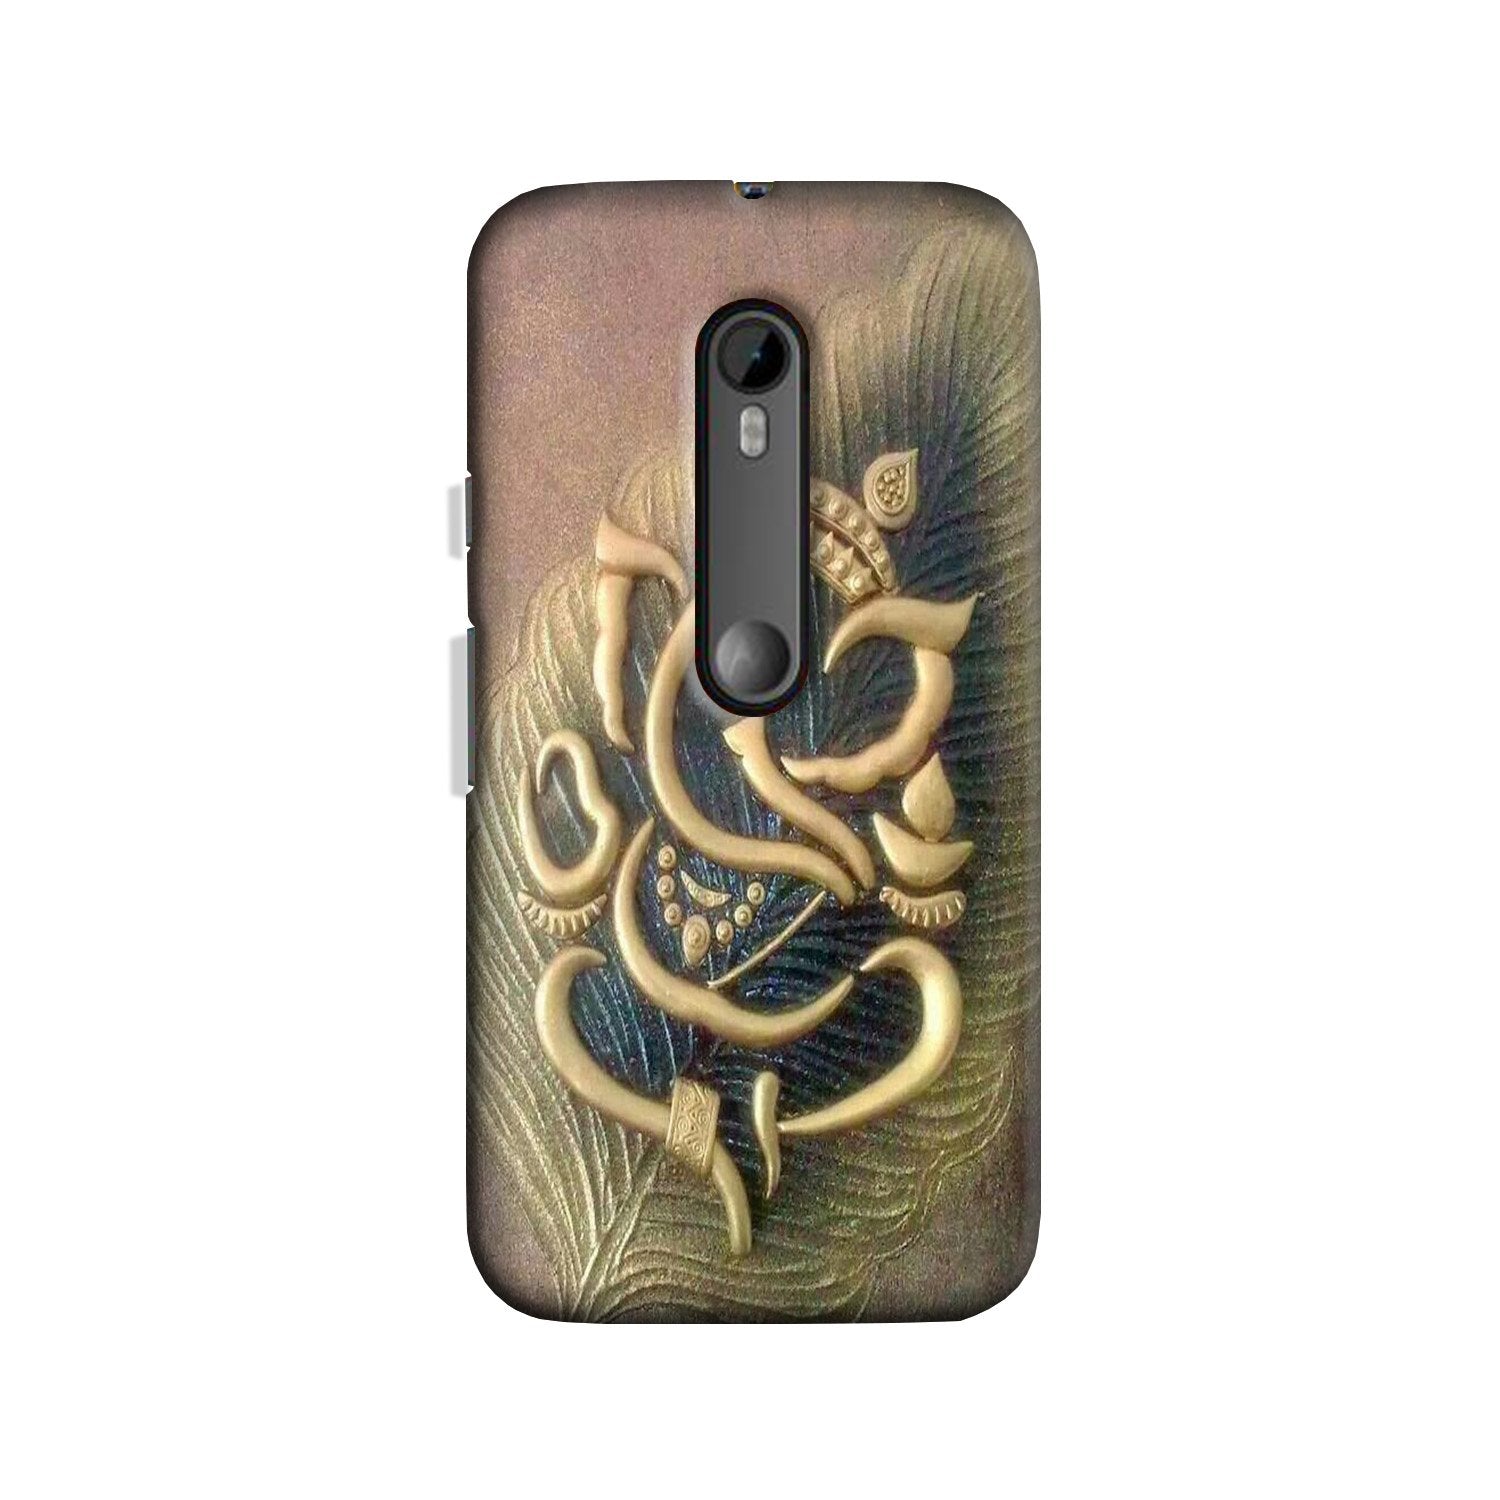 Lord Ganesha Case for Moto X Force